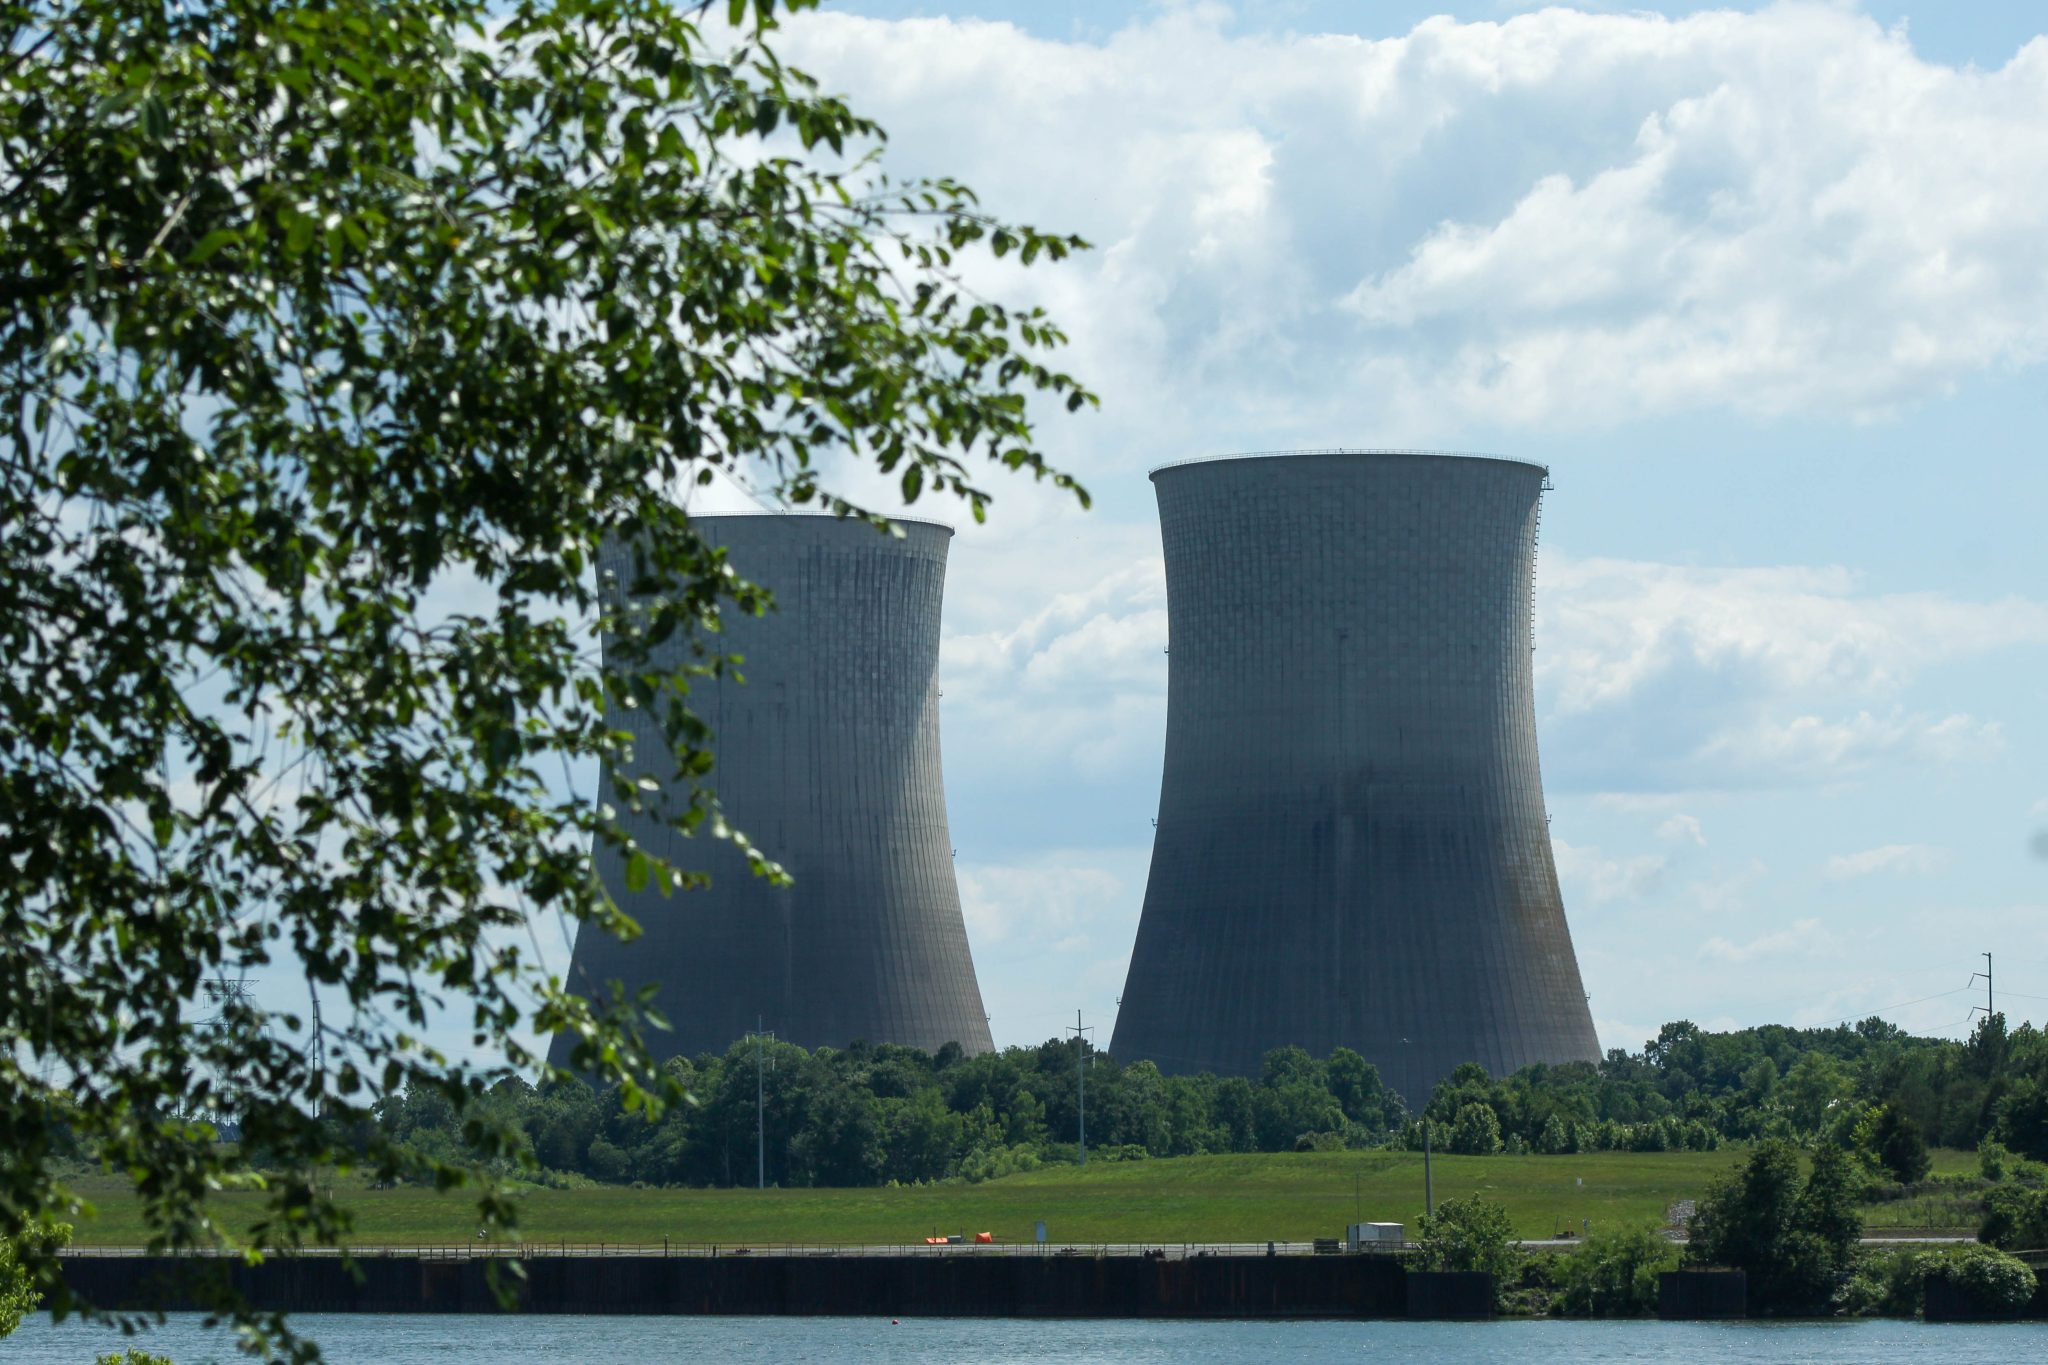 Watts Bar Power Plant on the Tennessee River